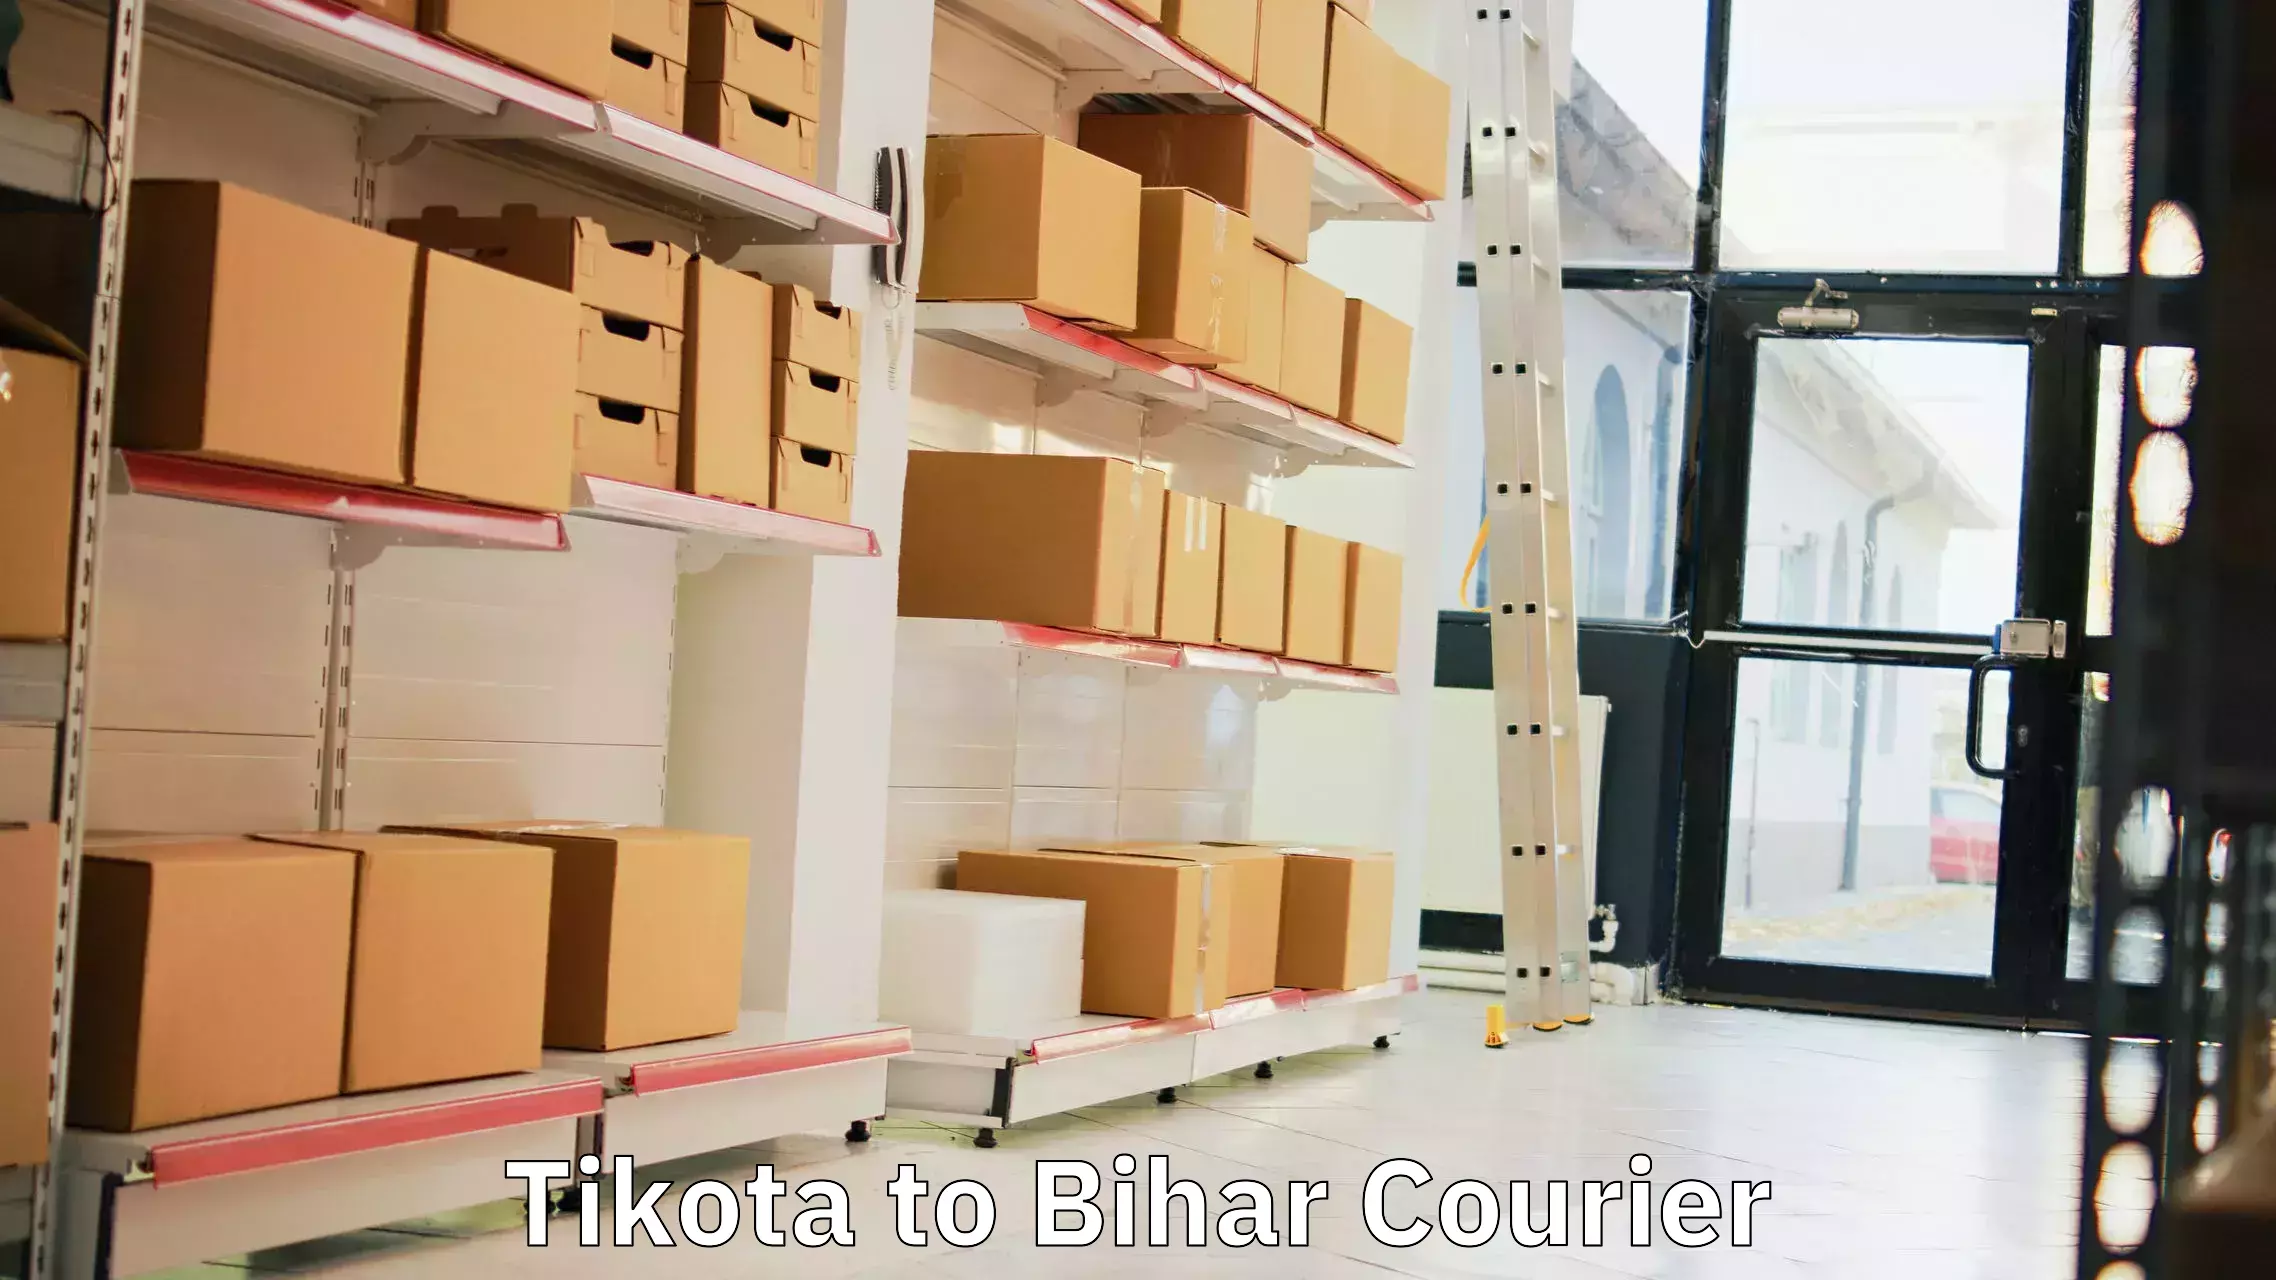 Personal courier services in Tikota to Bihar